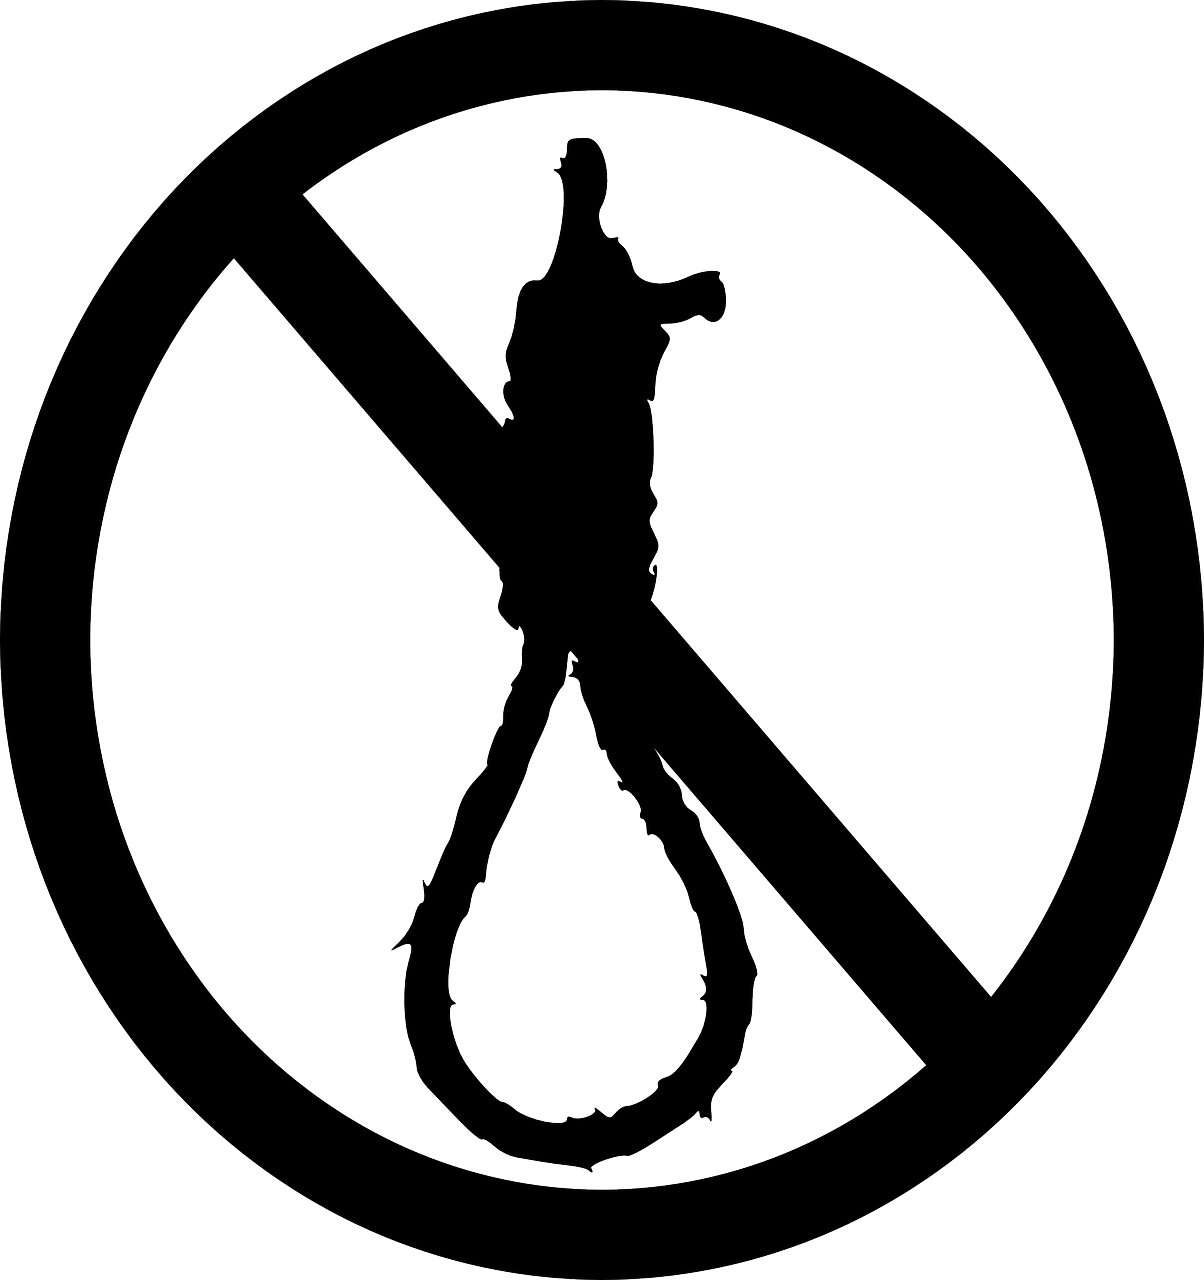 An image of a noose with a slash across it, signifying its abolition.